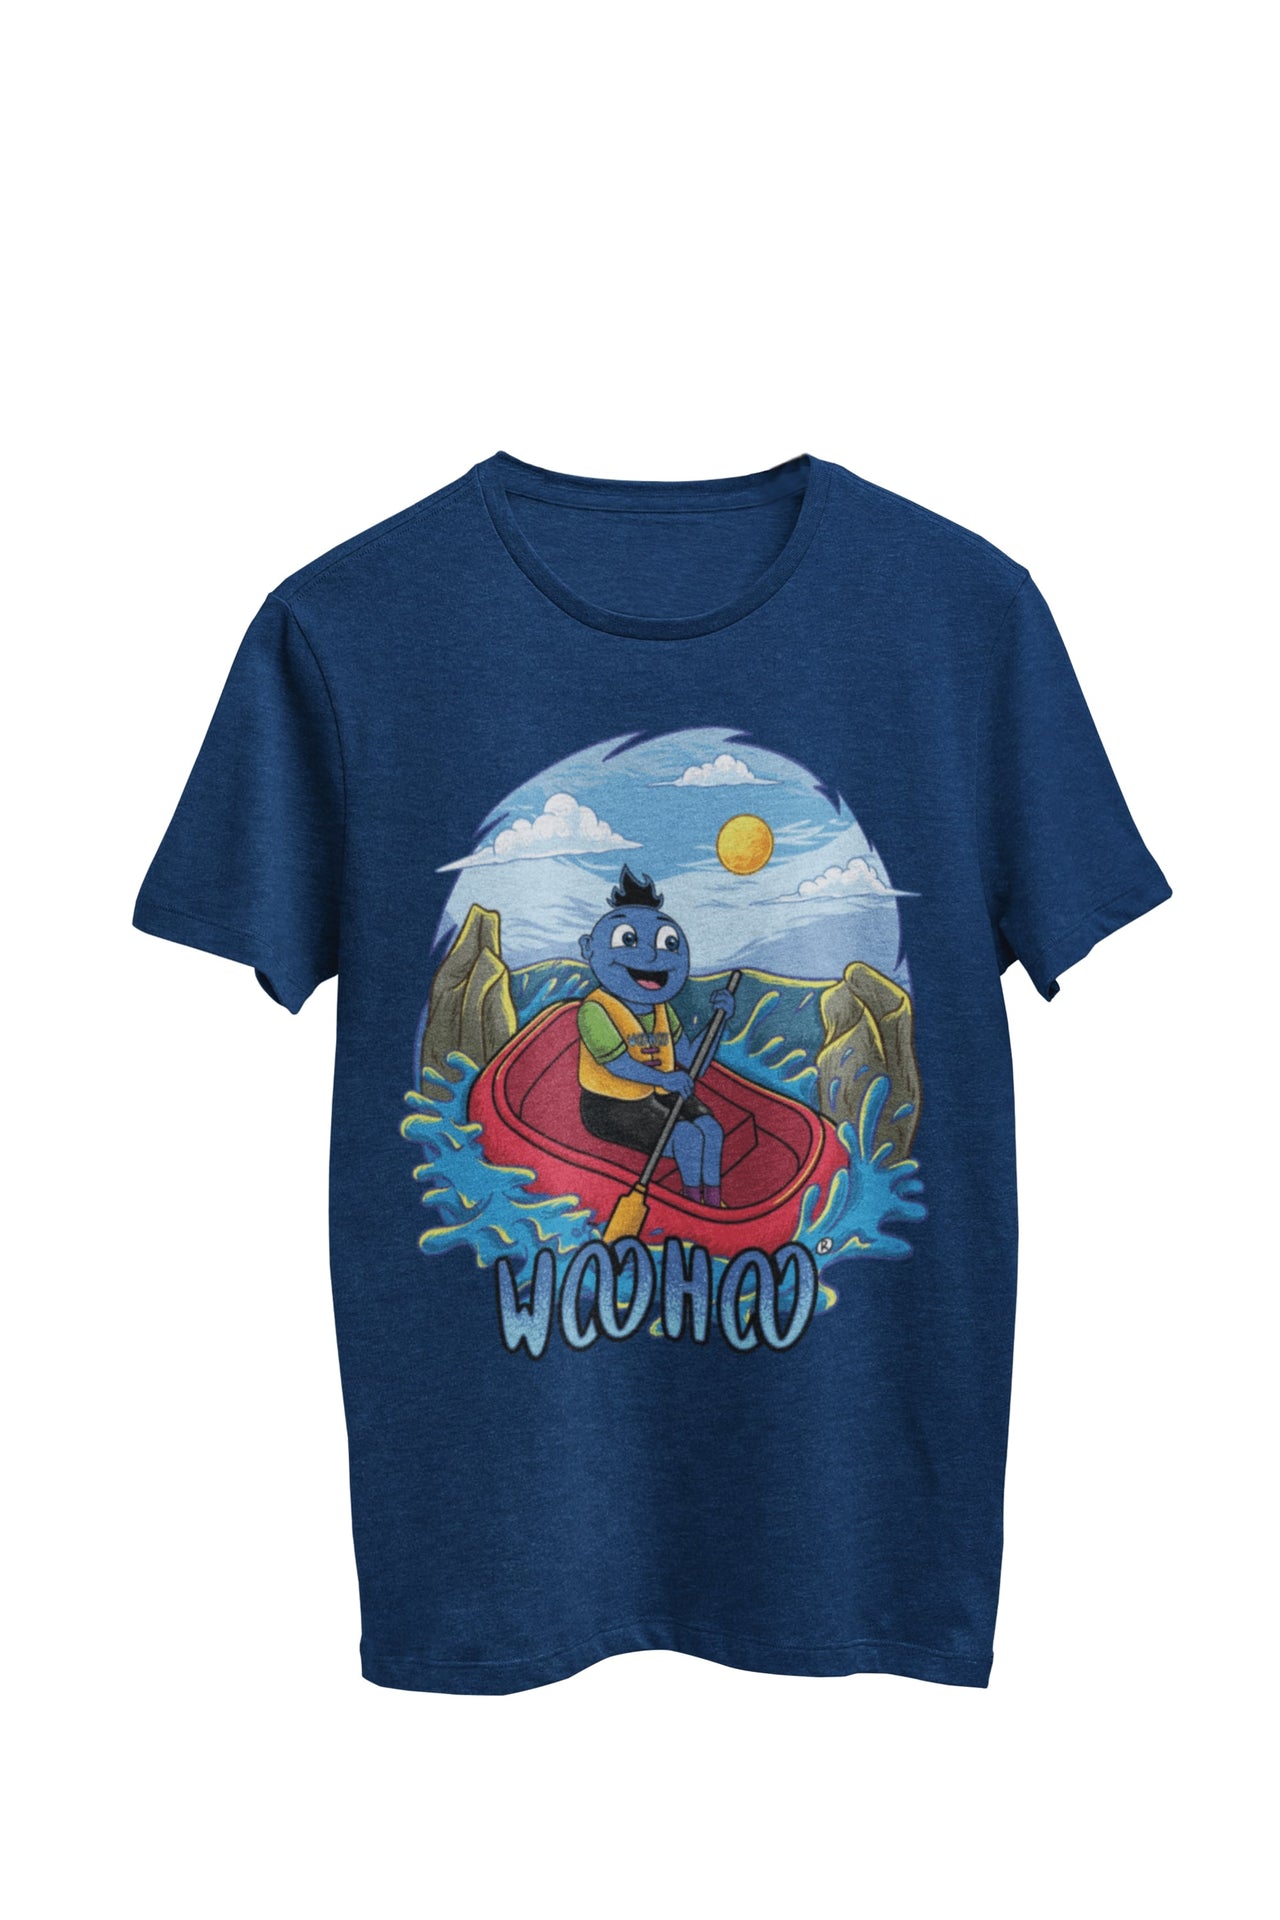 WooHooBerry fearlessly navigating through rapid currents while river rafting, the navy T-shirt adorned with a bold and artistic 'WooHoo.' Capturing the adrenaline and excitement of the outdoor adventure